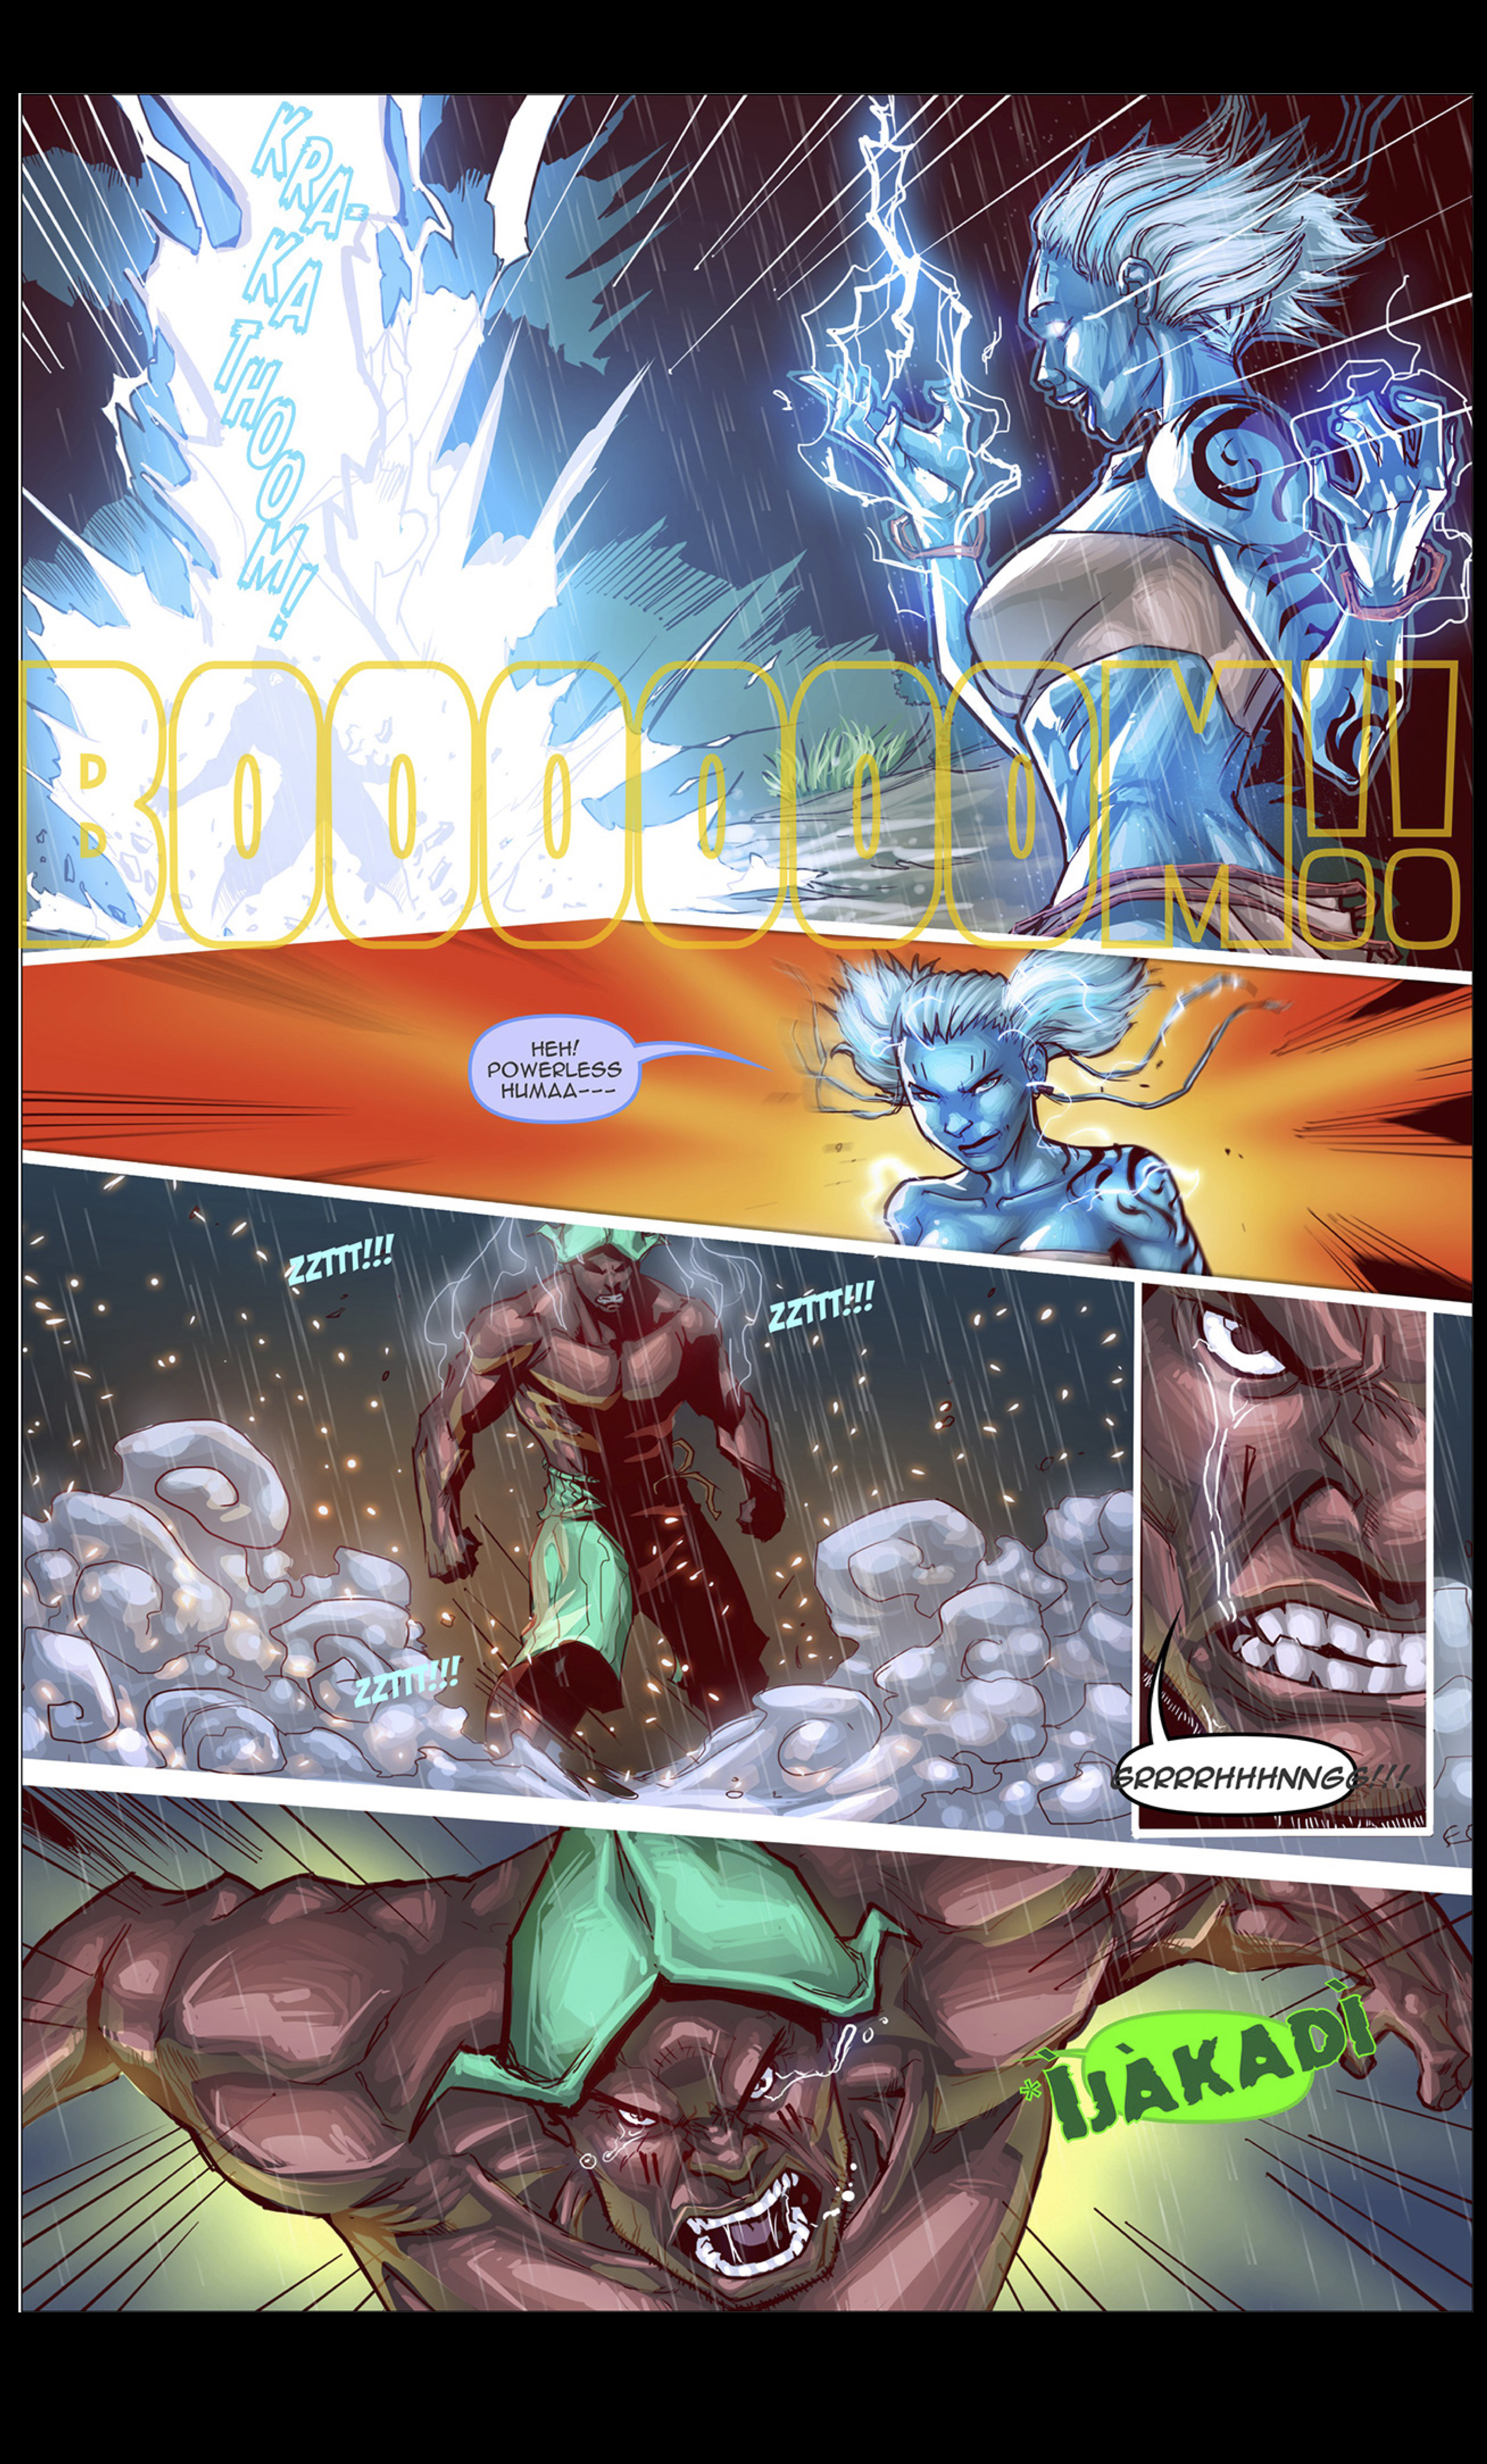 panel depicting fight between a mortal and a god from visionary ascension comic